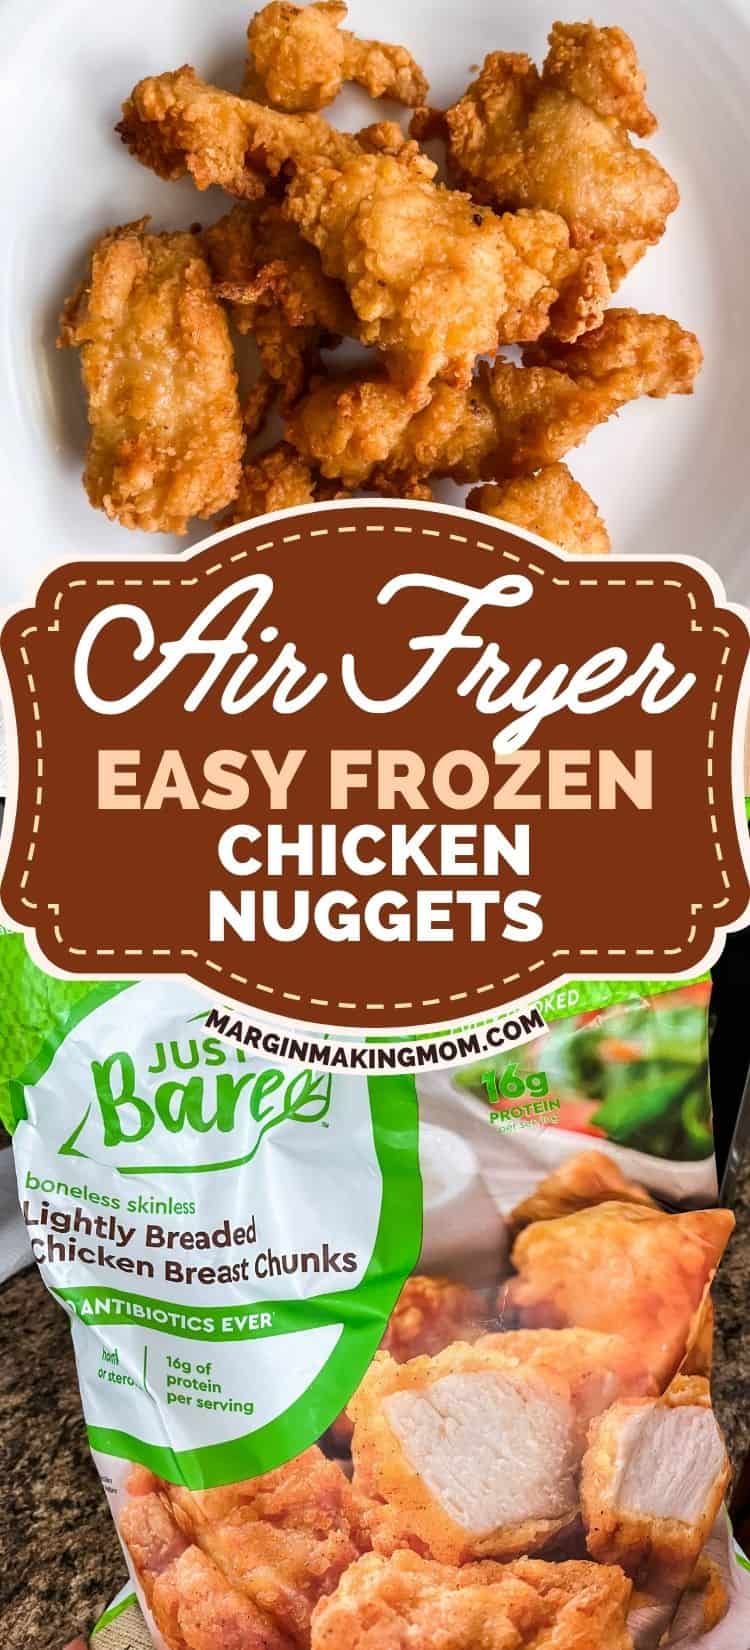 collage of 2 photos; one shows a bag of Just Bare frozen chicken nuggets, and the other shows cooked chicken nuggets from the air fryer.